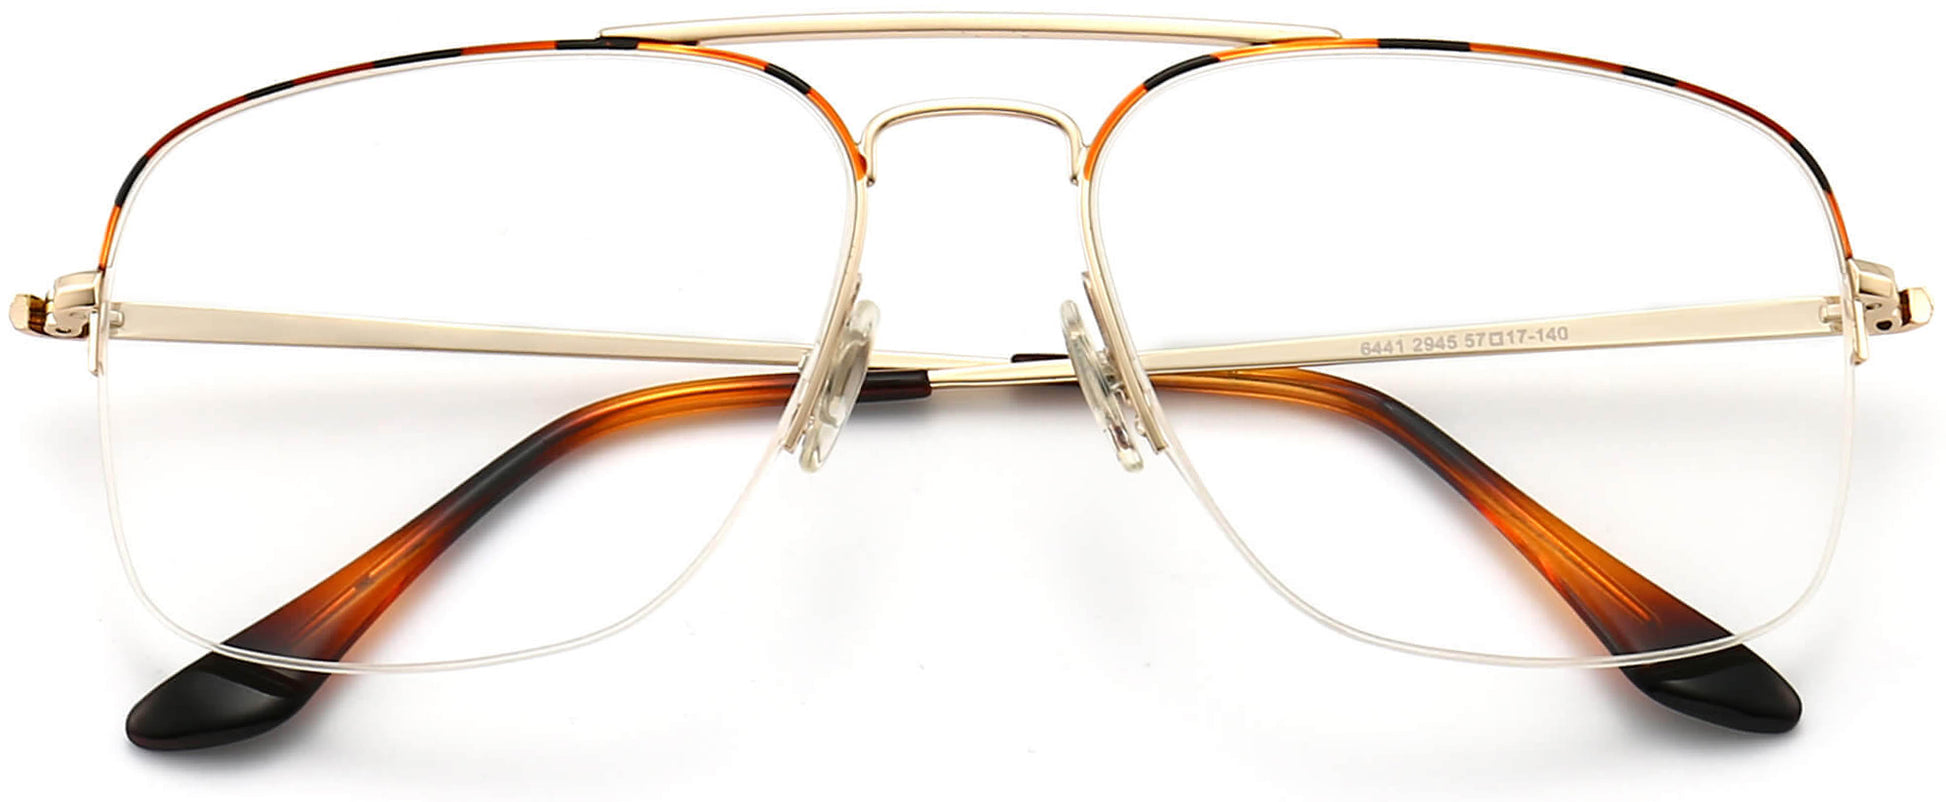 Zayden Square Tortoise Eyeglasses from ANRRI, closed view